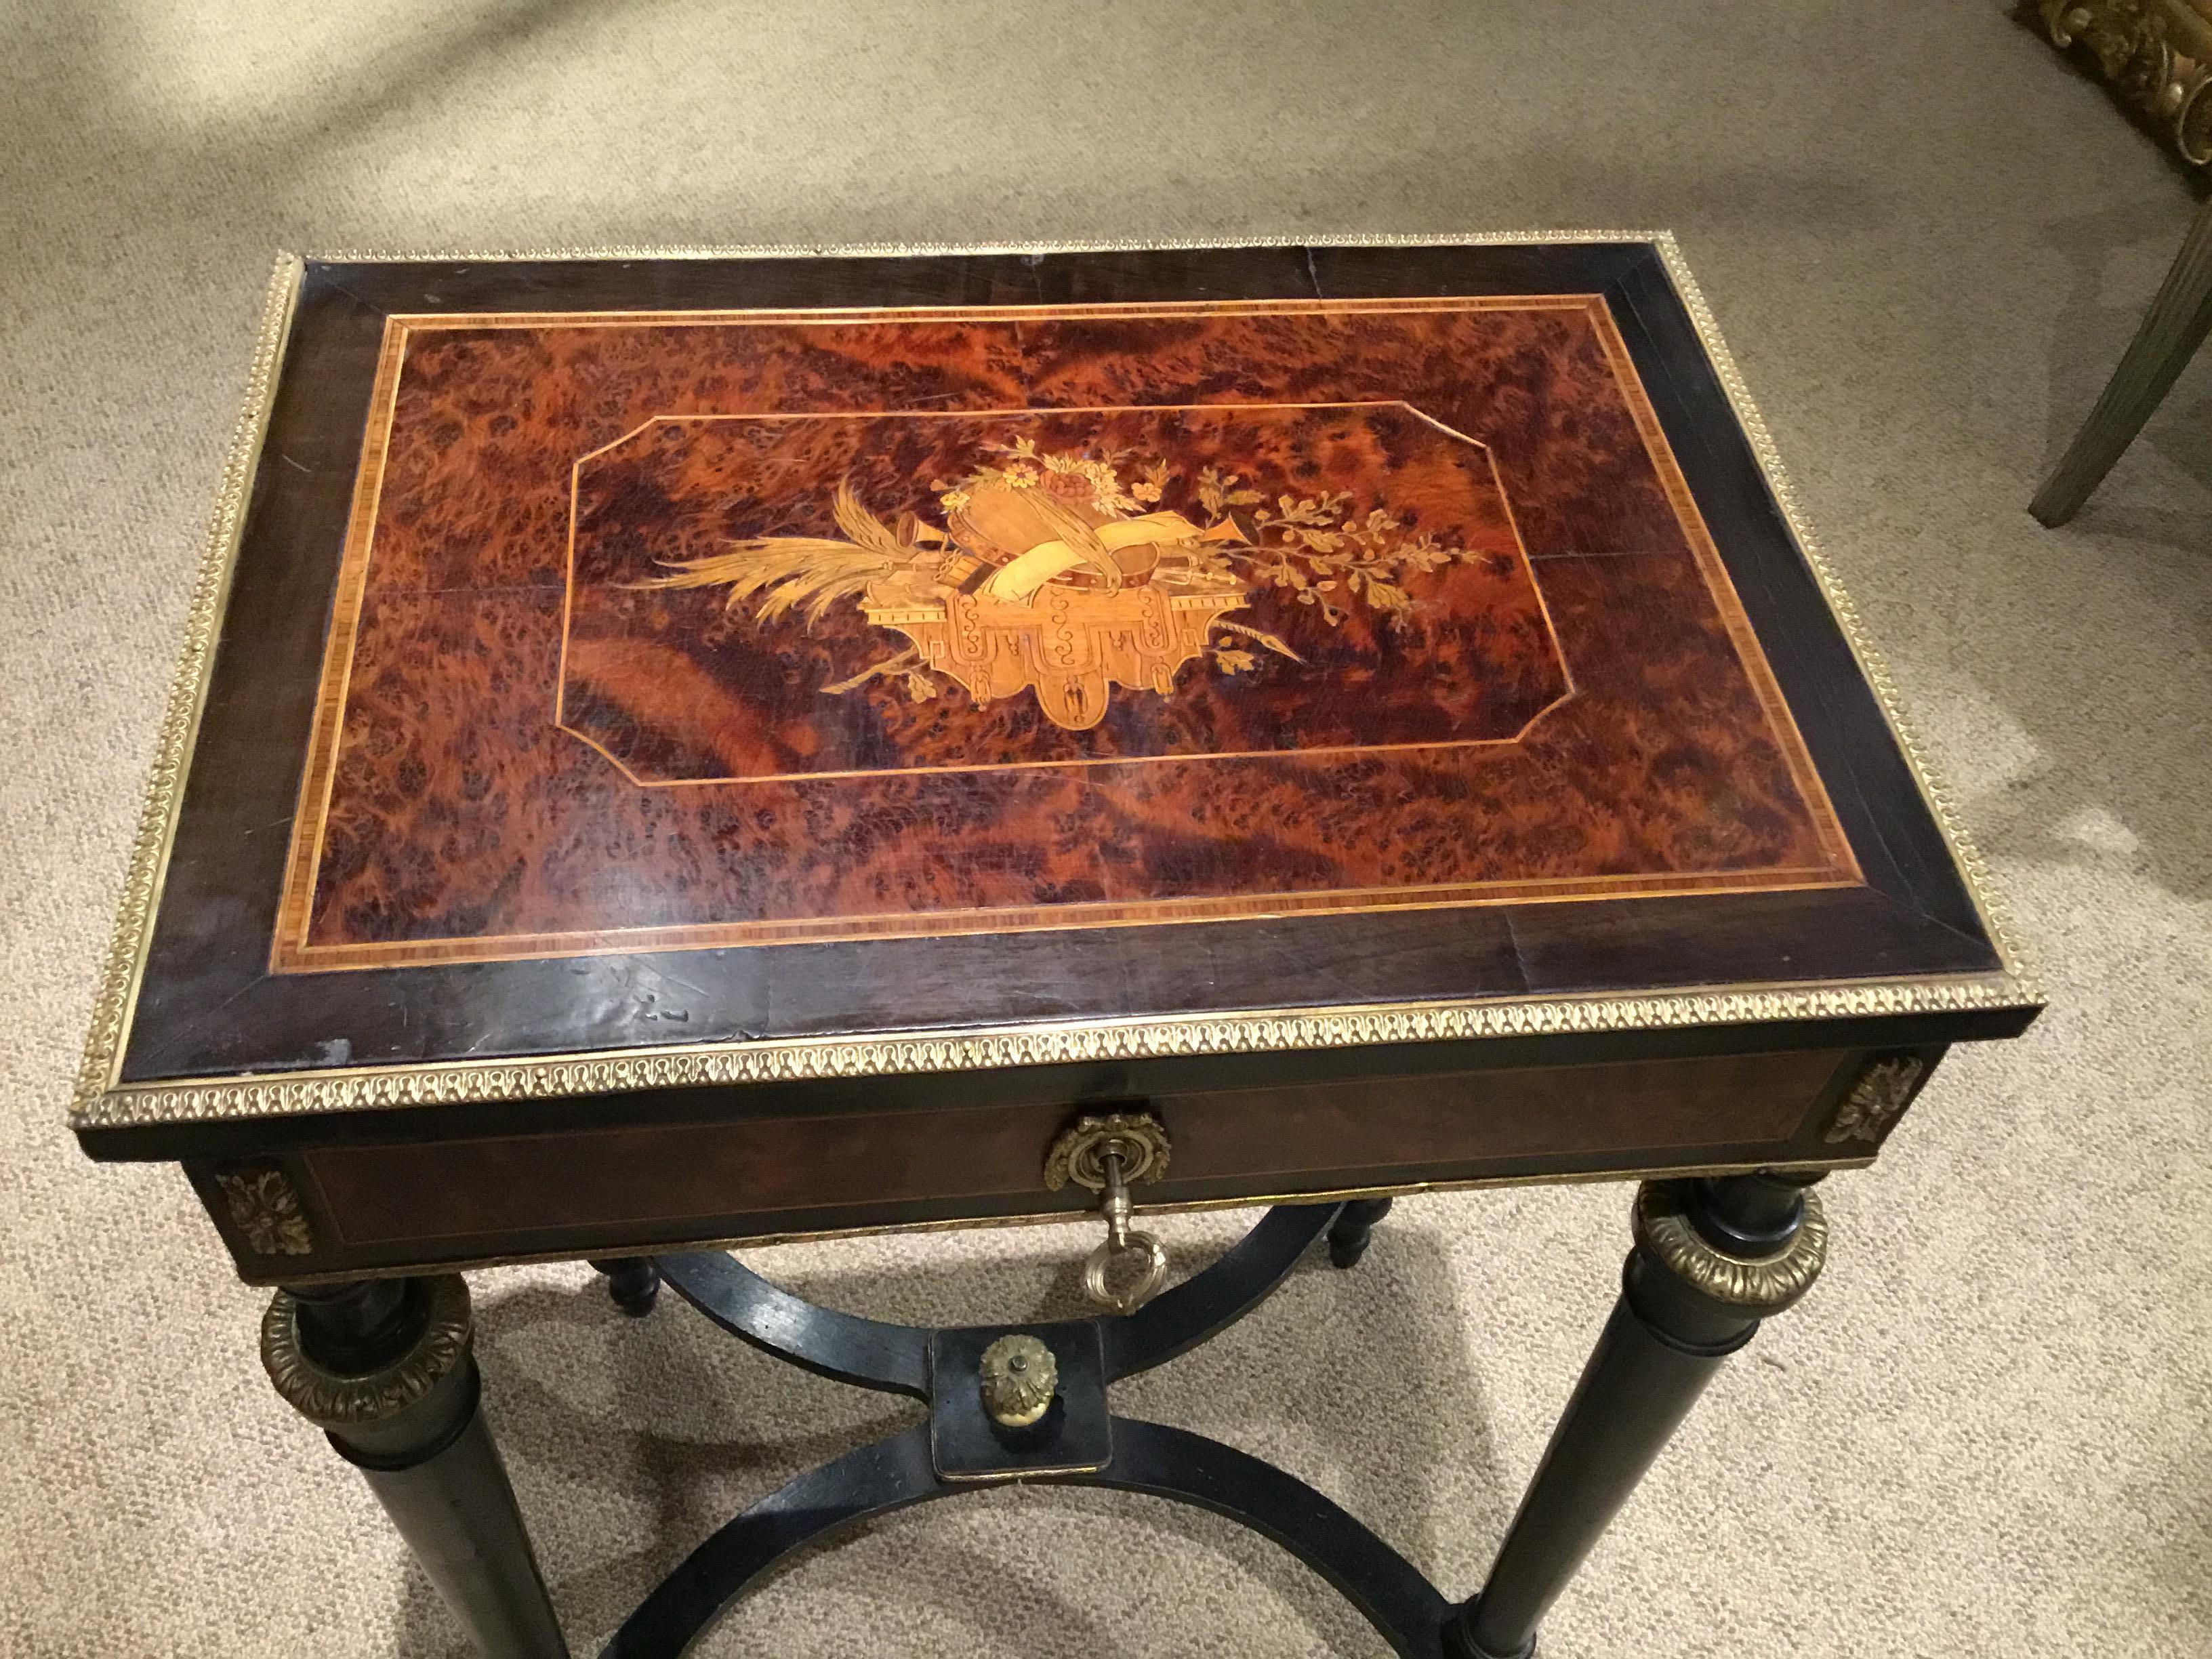 Marquetry French Napoleon III Period Ebonized Travailleuse/Dressing Table, 19th Century